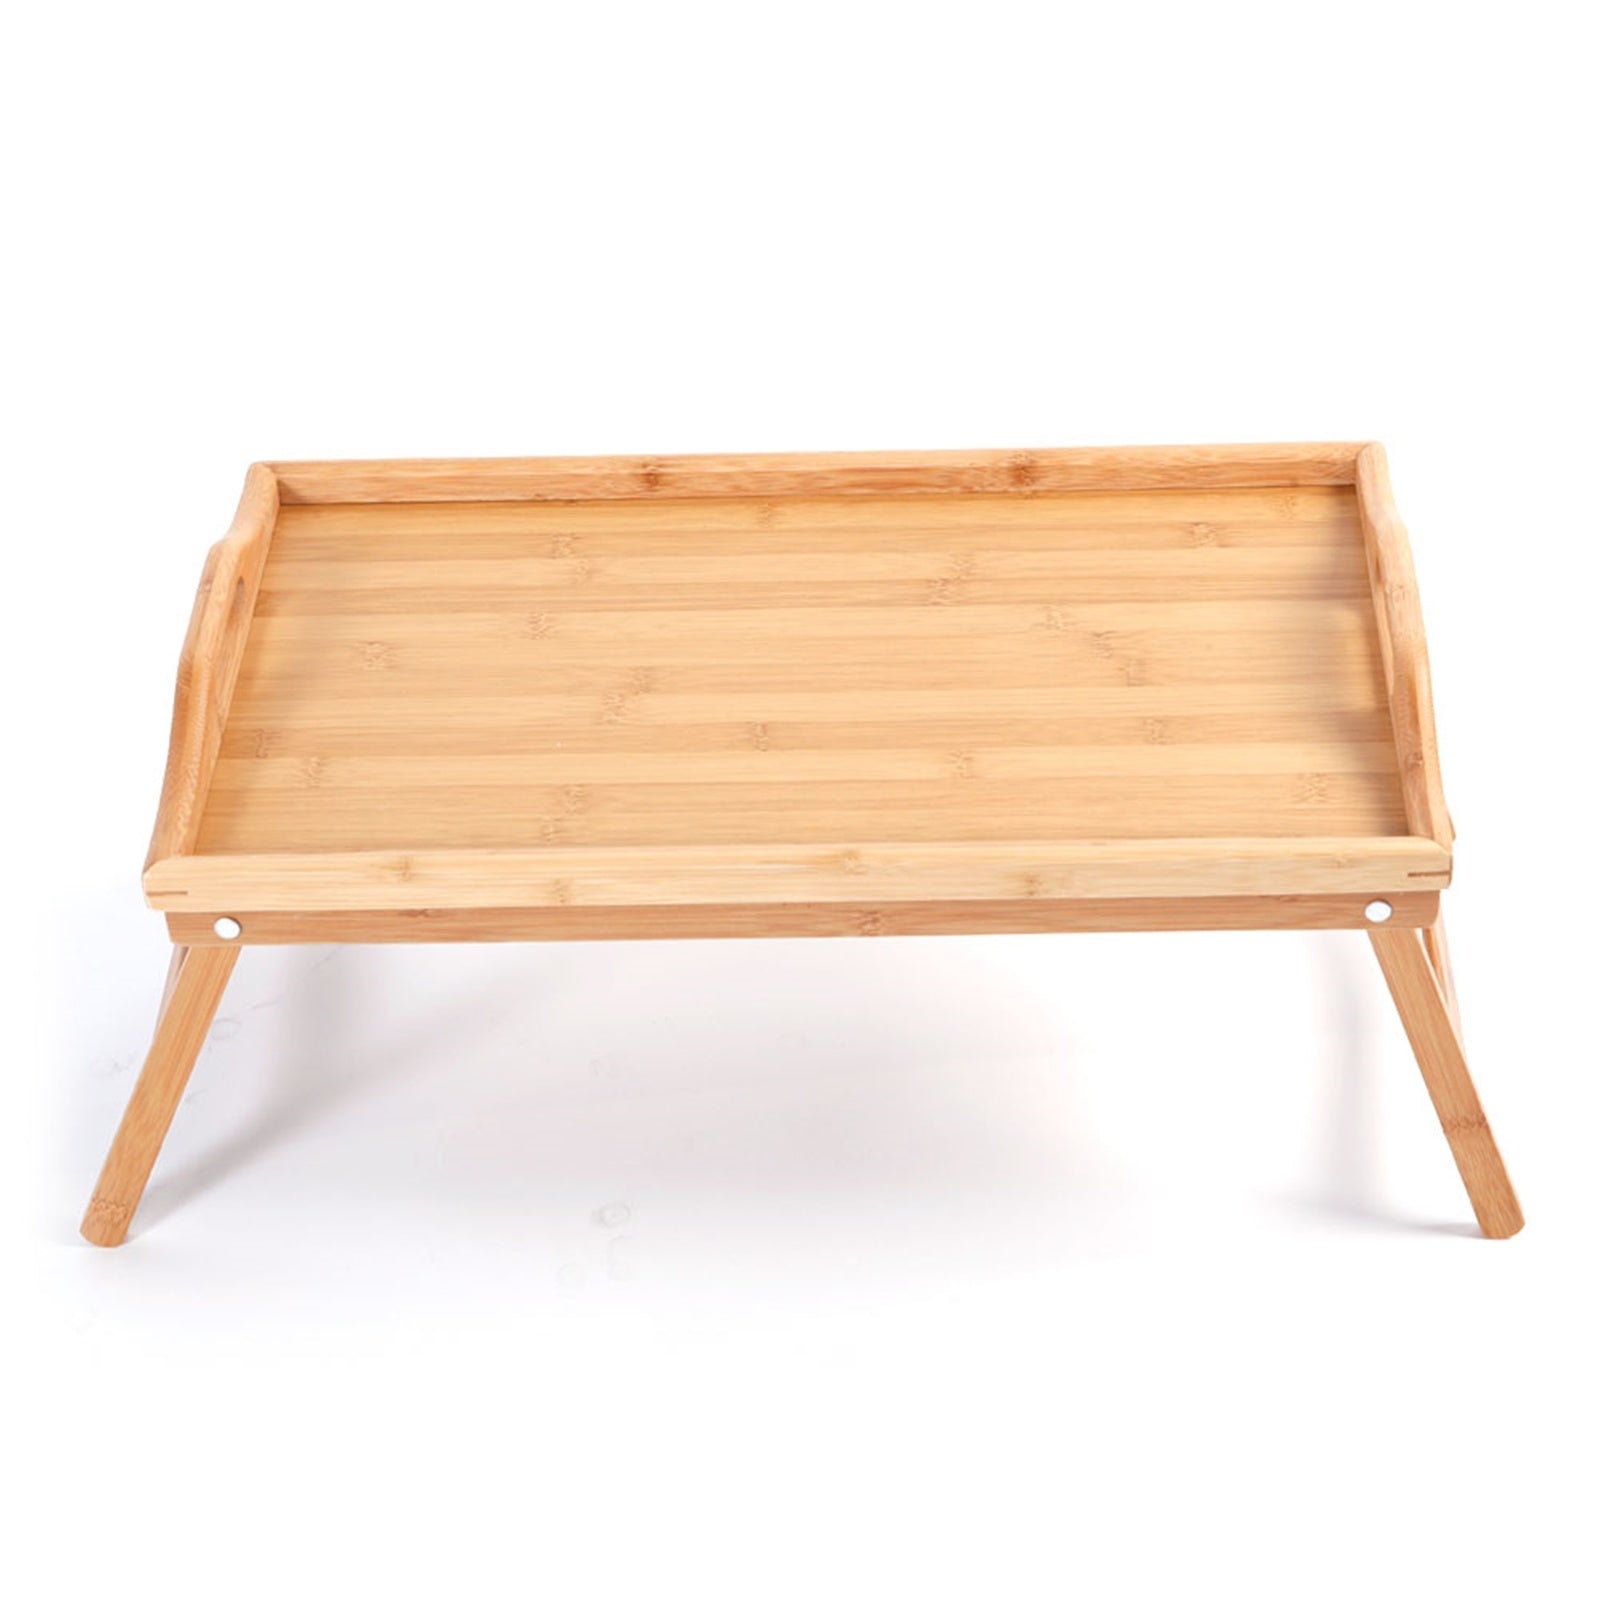 Simple Bamboo Tea Table, Bed Tray Table with Folding Legs, Serving Breakfast in Bed or Use As a TV Table, Laptop Computer Tray, Snack Tray with Moso Natural Bamboo RT